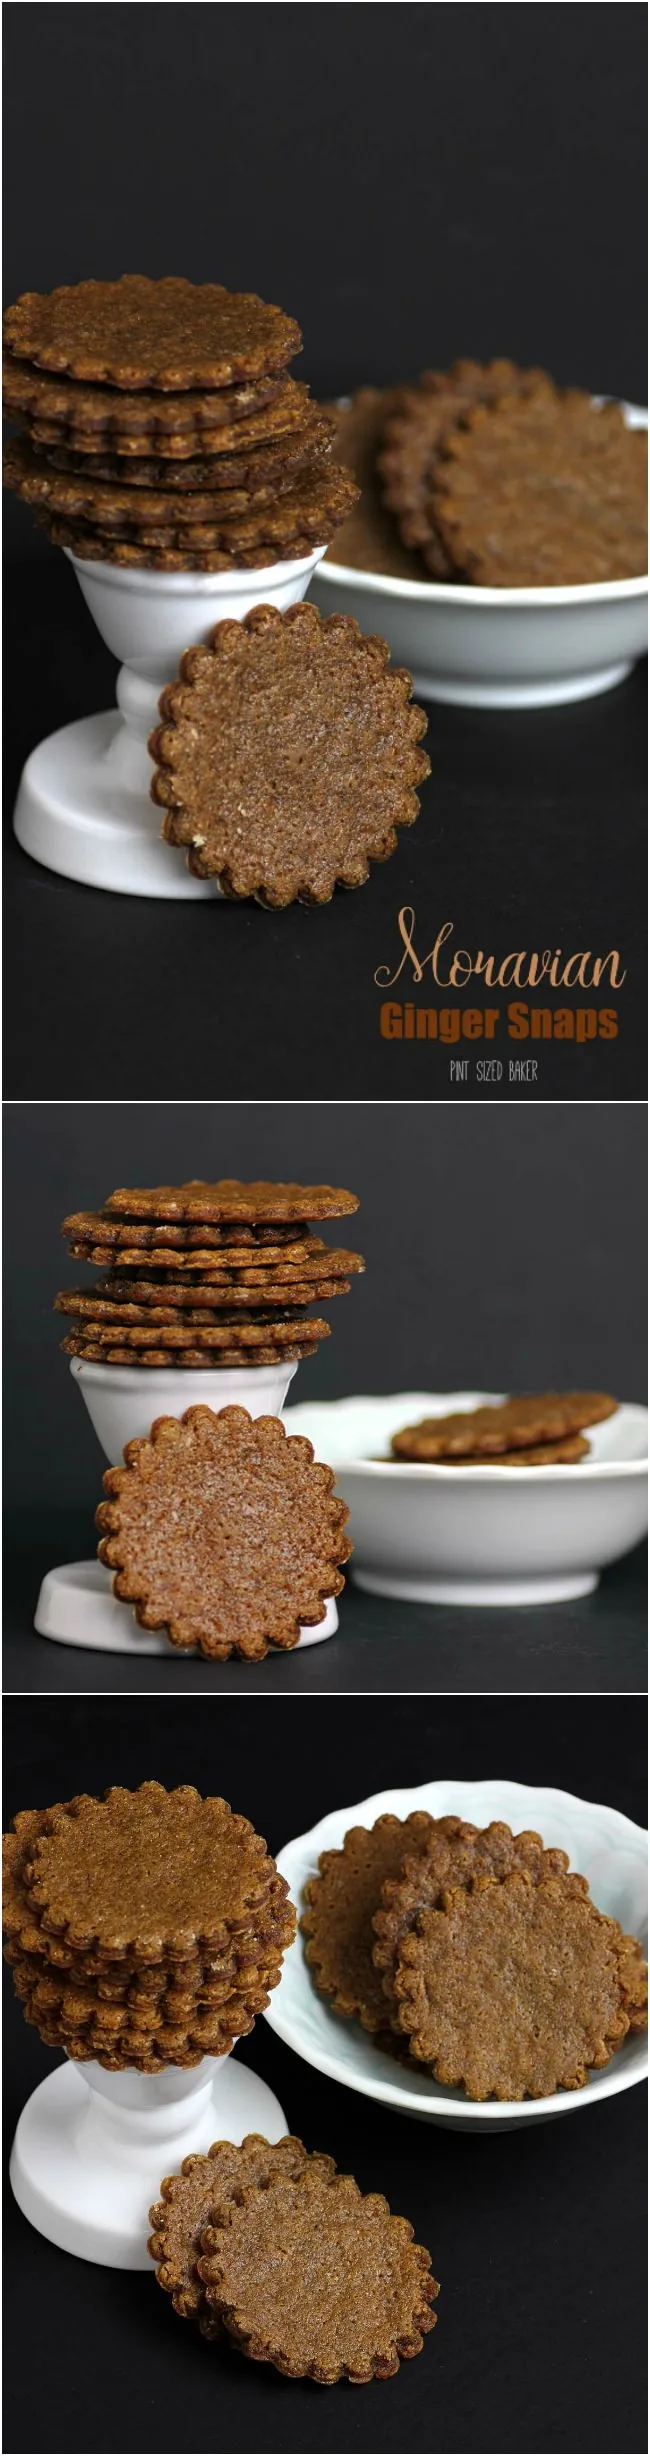 Enjoy a few Moravian Ginger Snaps with your tea or coffee. Spicy with a great crunch!